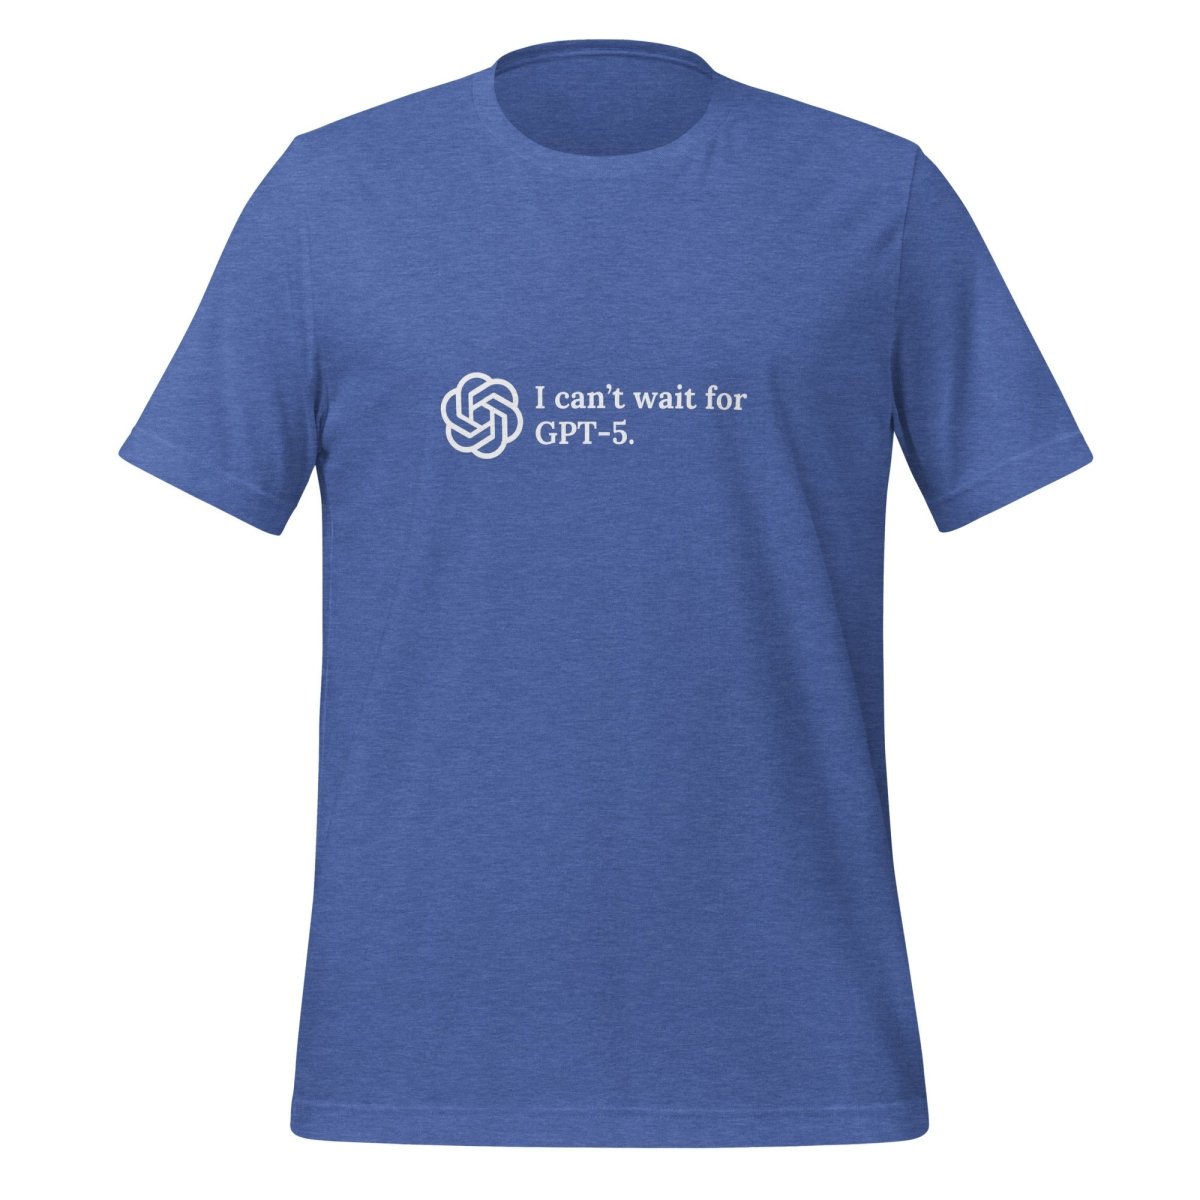 I can't wait for GPT - 5. T - Shirt (unisex) - Heather True Royal - AI Store